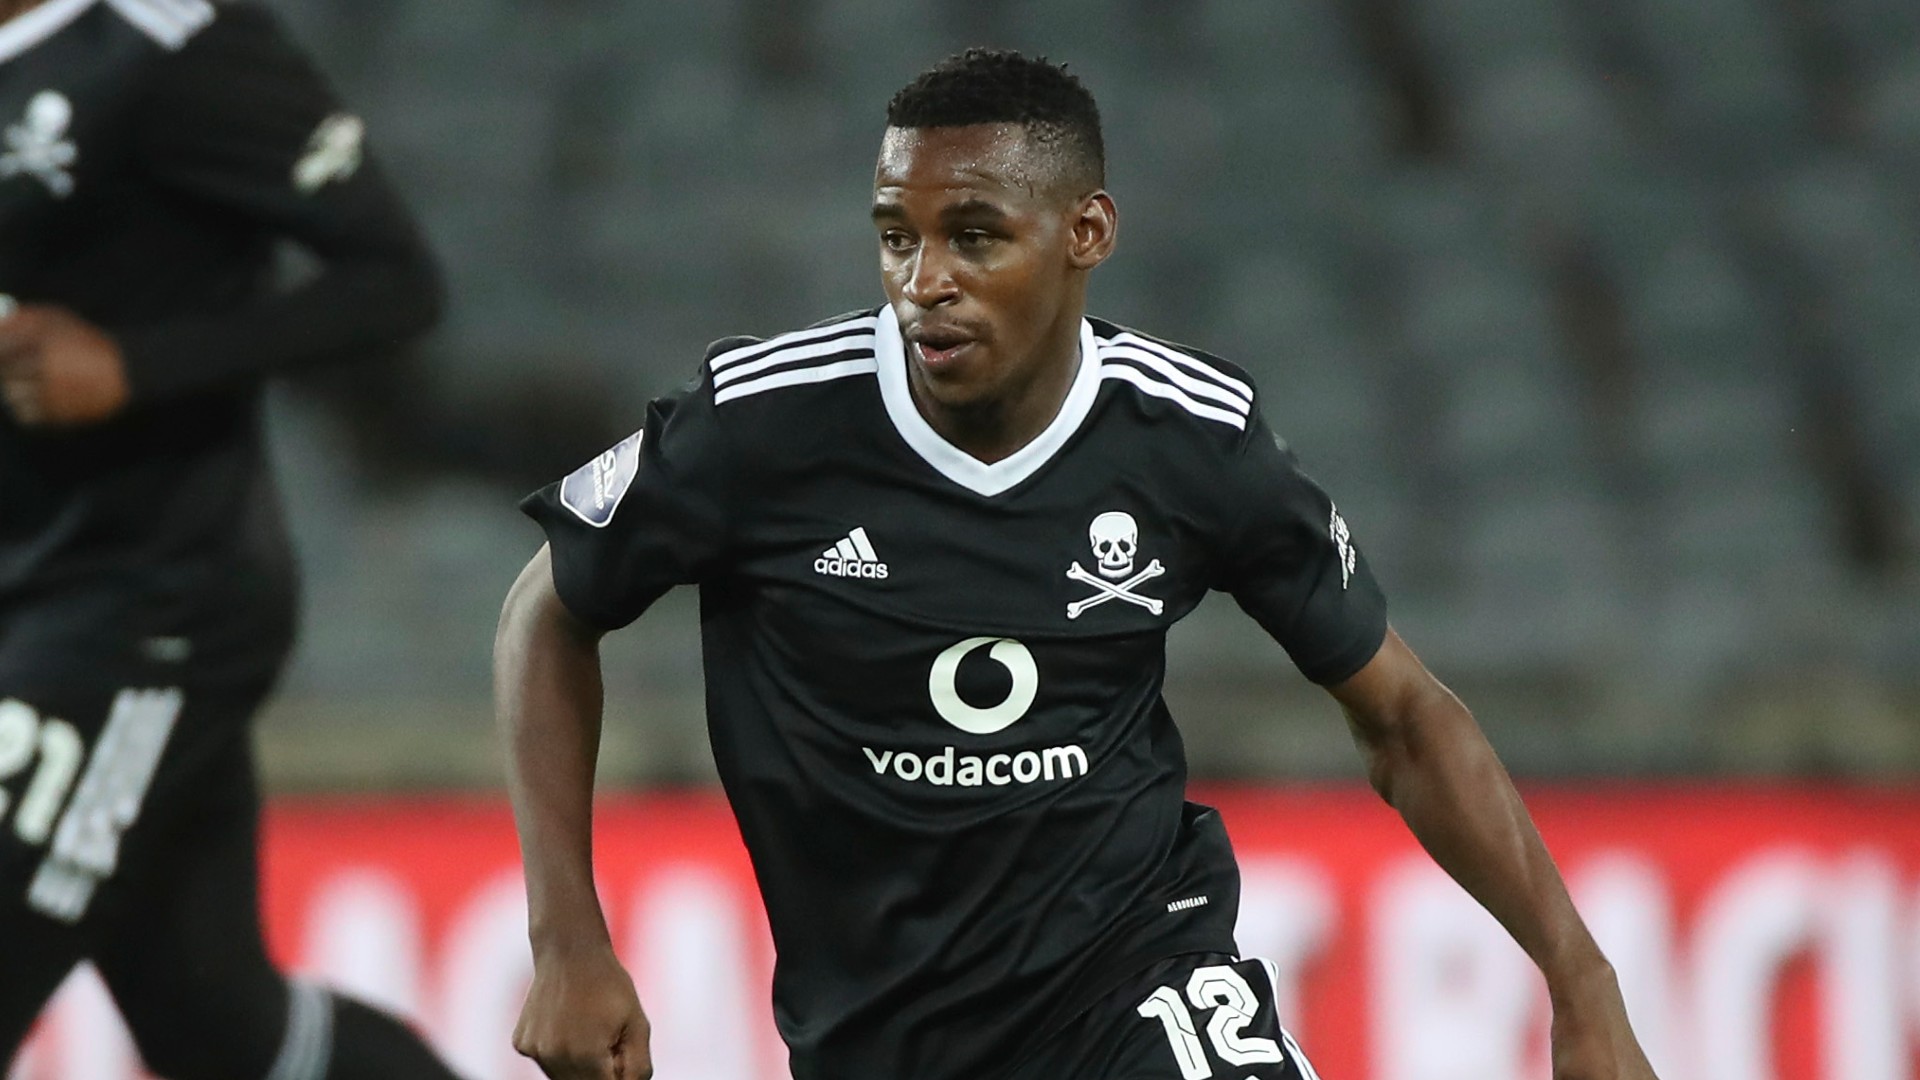 Orlando Pirates players likely to be sold or loaned out